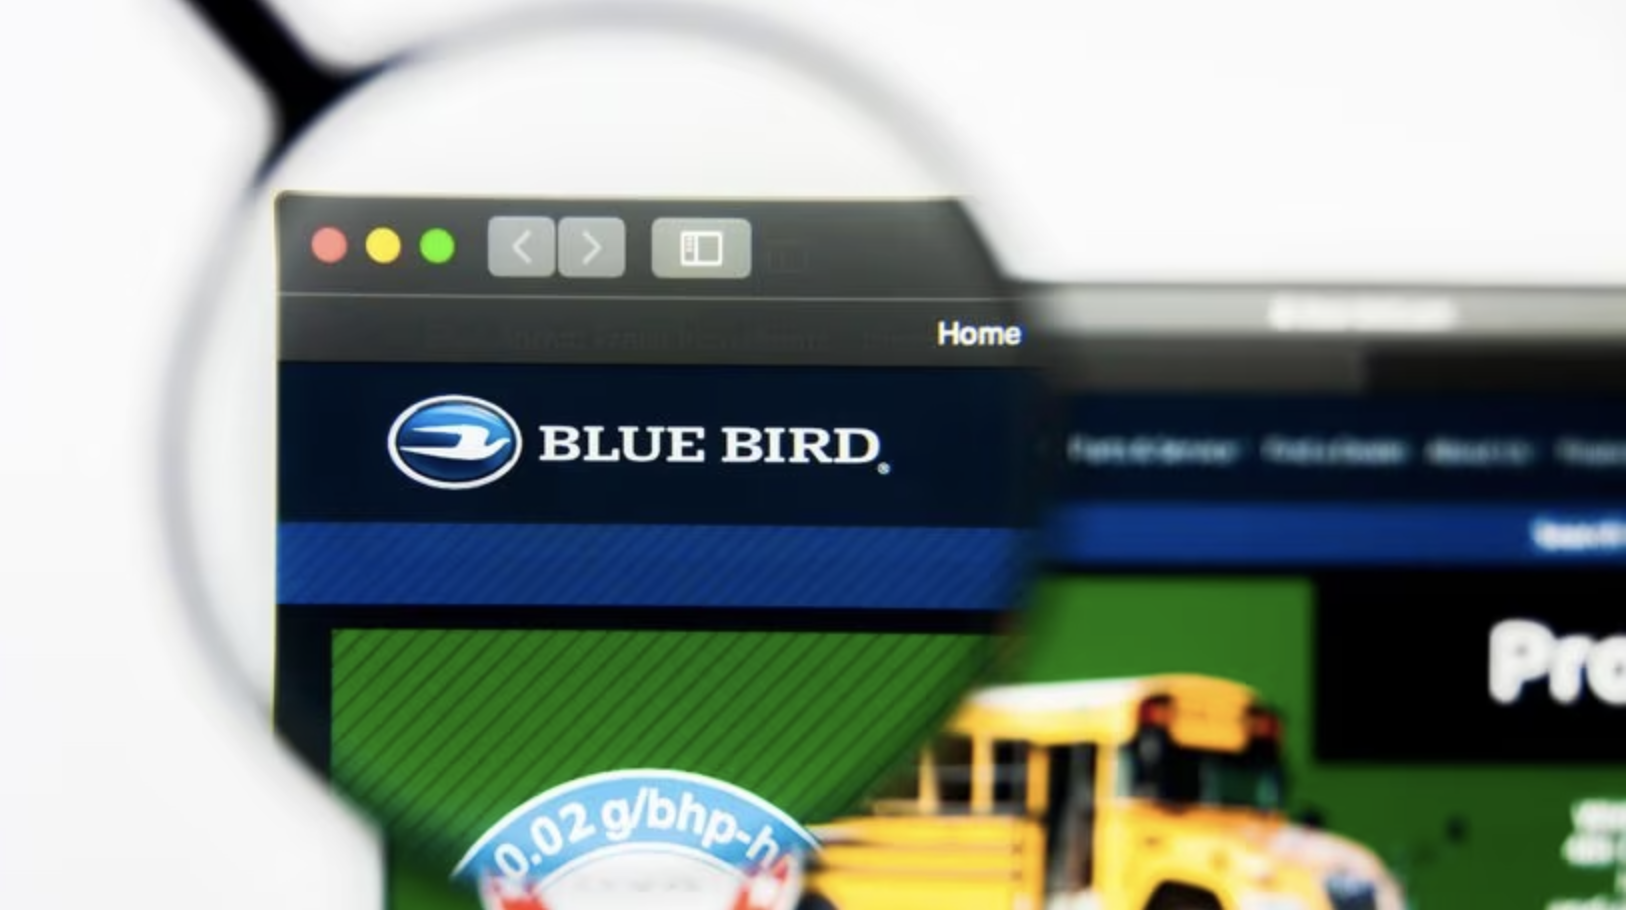 Ex-employees charge racial discrimination at Blue Bird